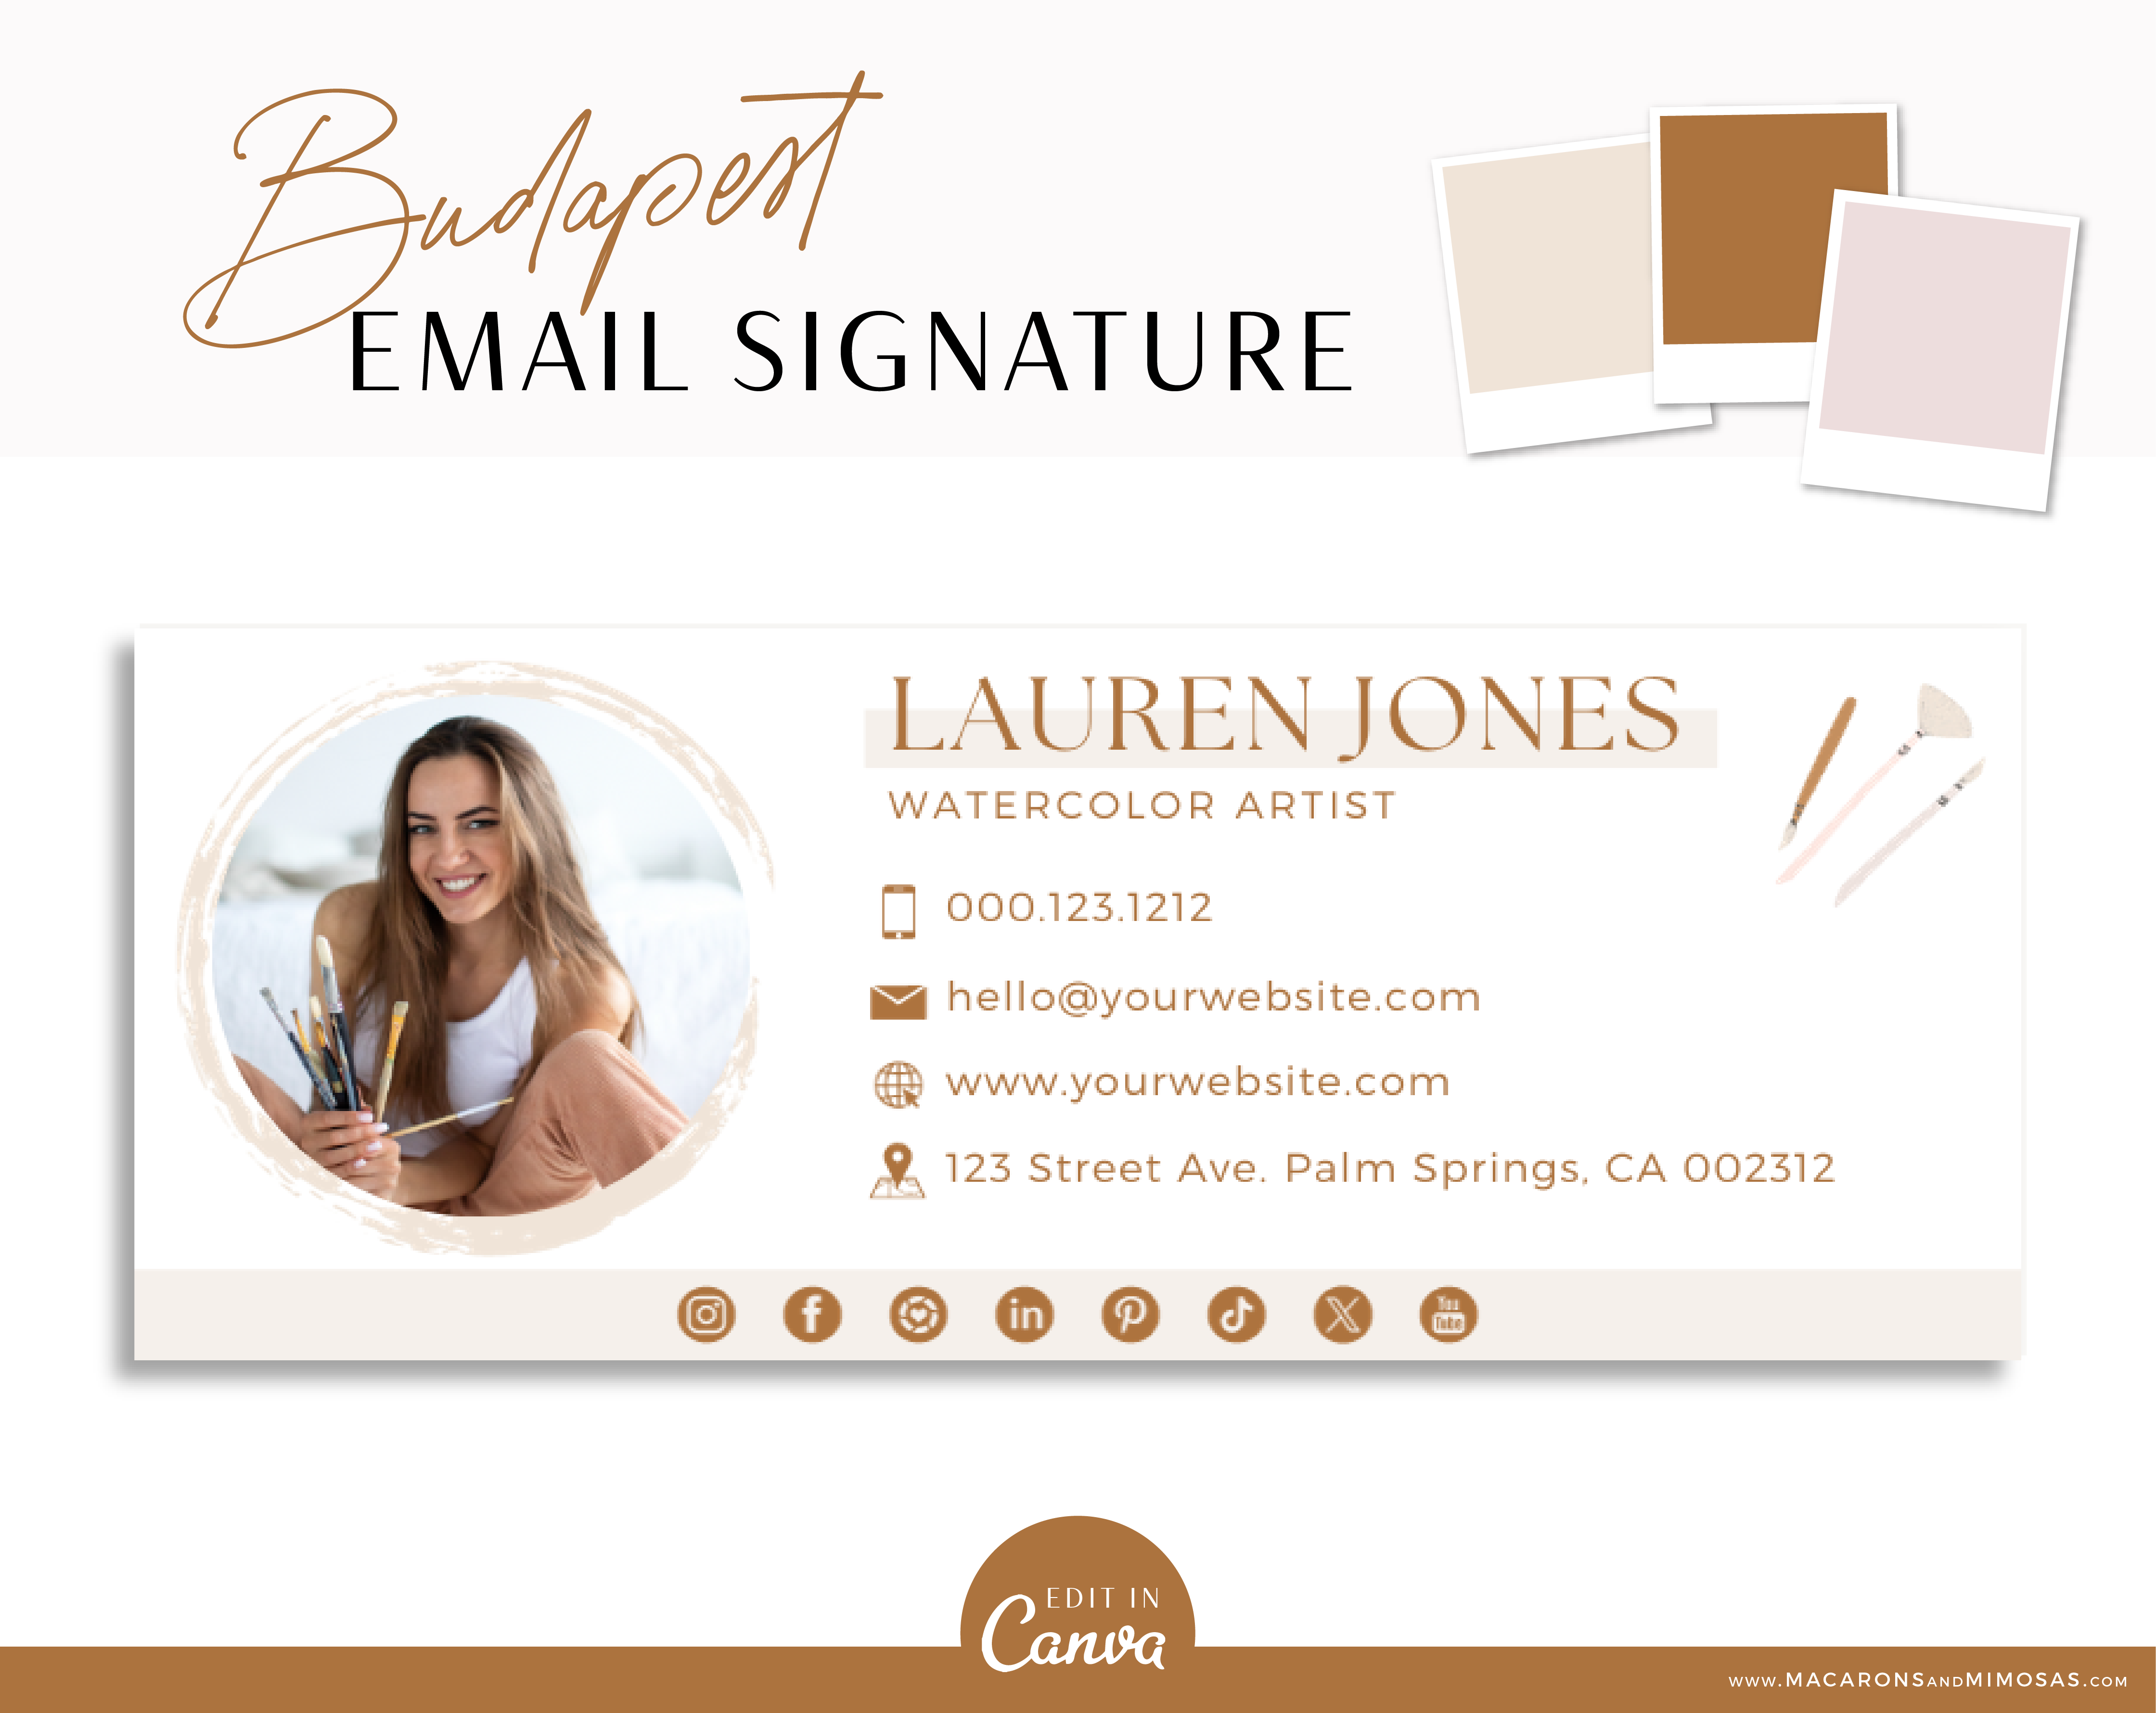 Professional email signature template to edit in Free Canva and add your clickable link to style your business or personal email account.